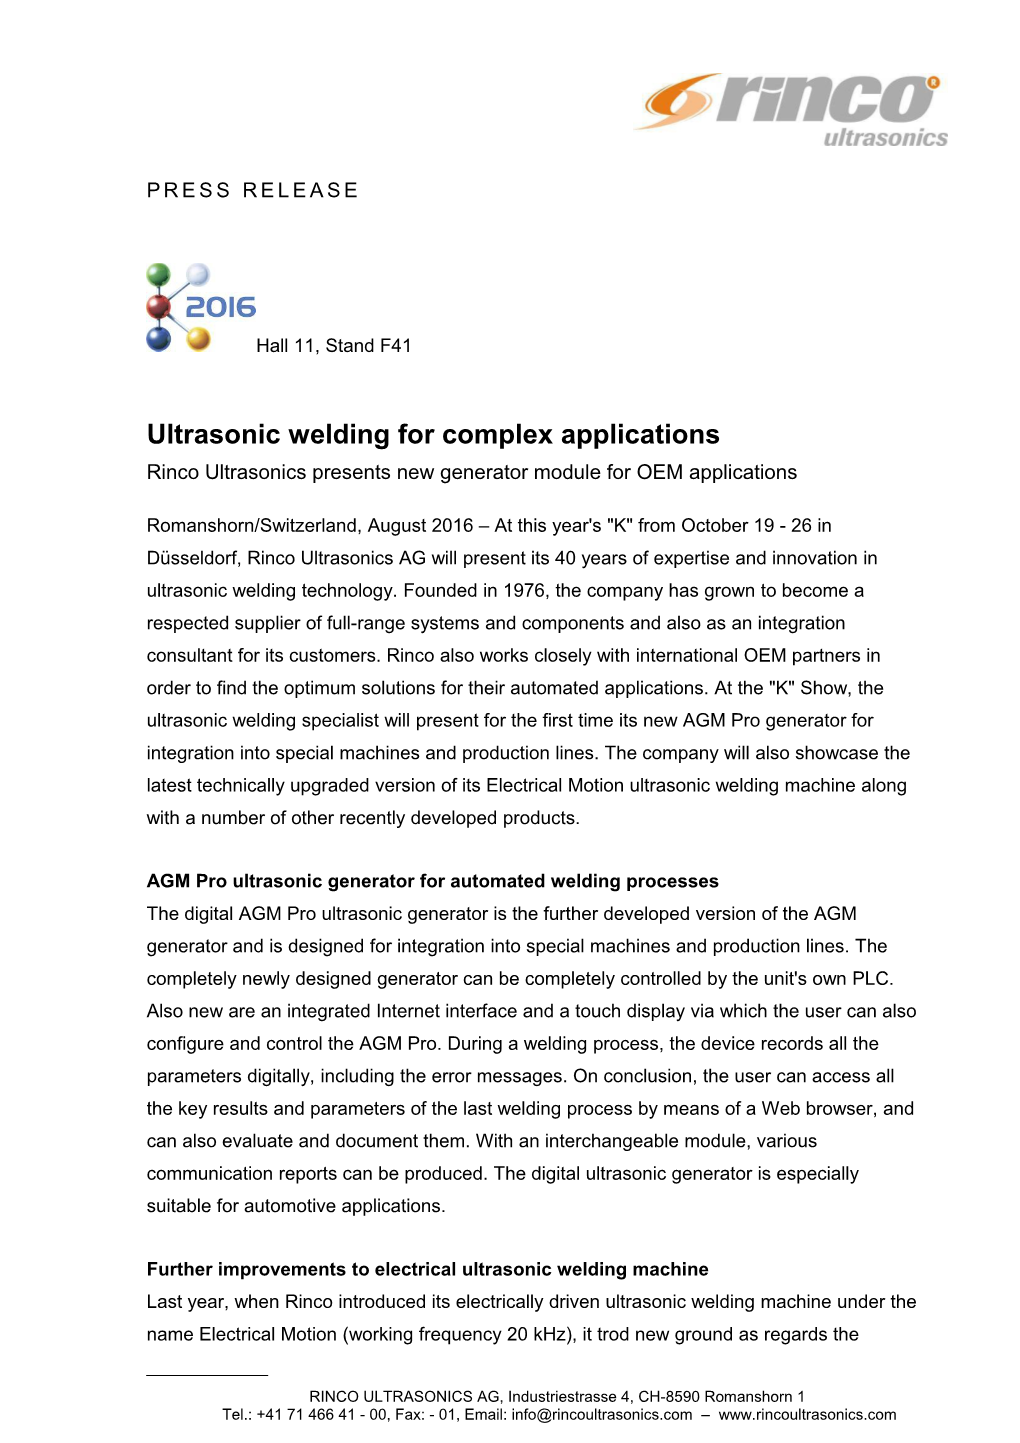 Ultrasonic Welding for Complex Applications